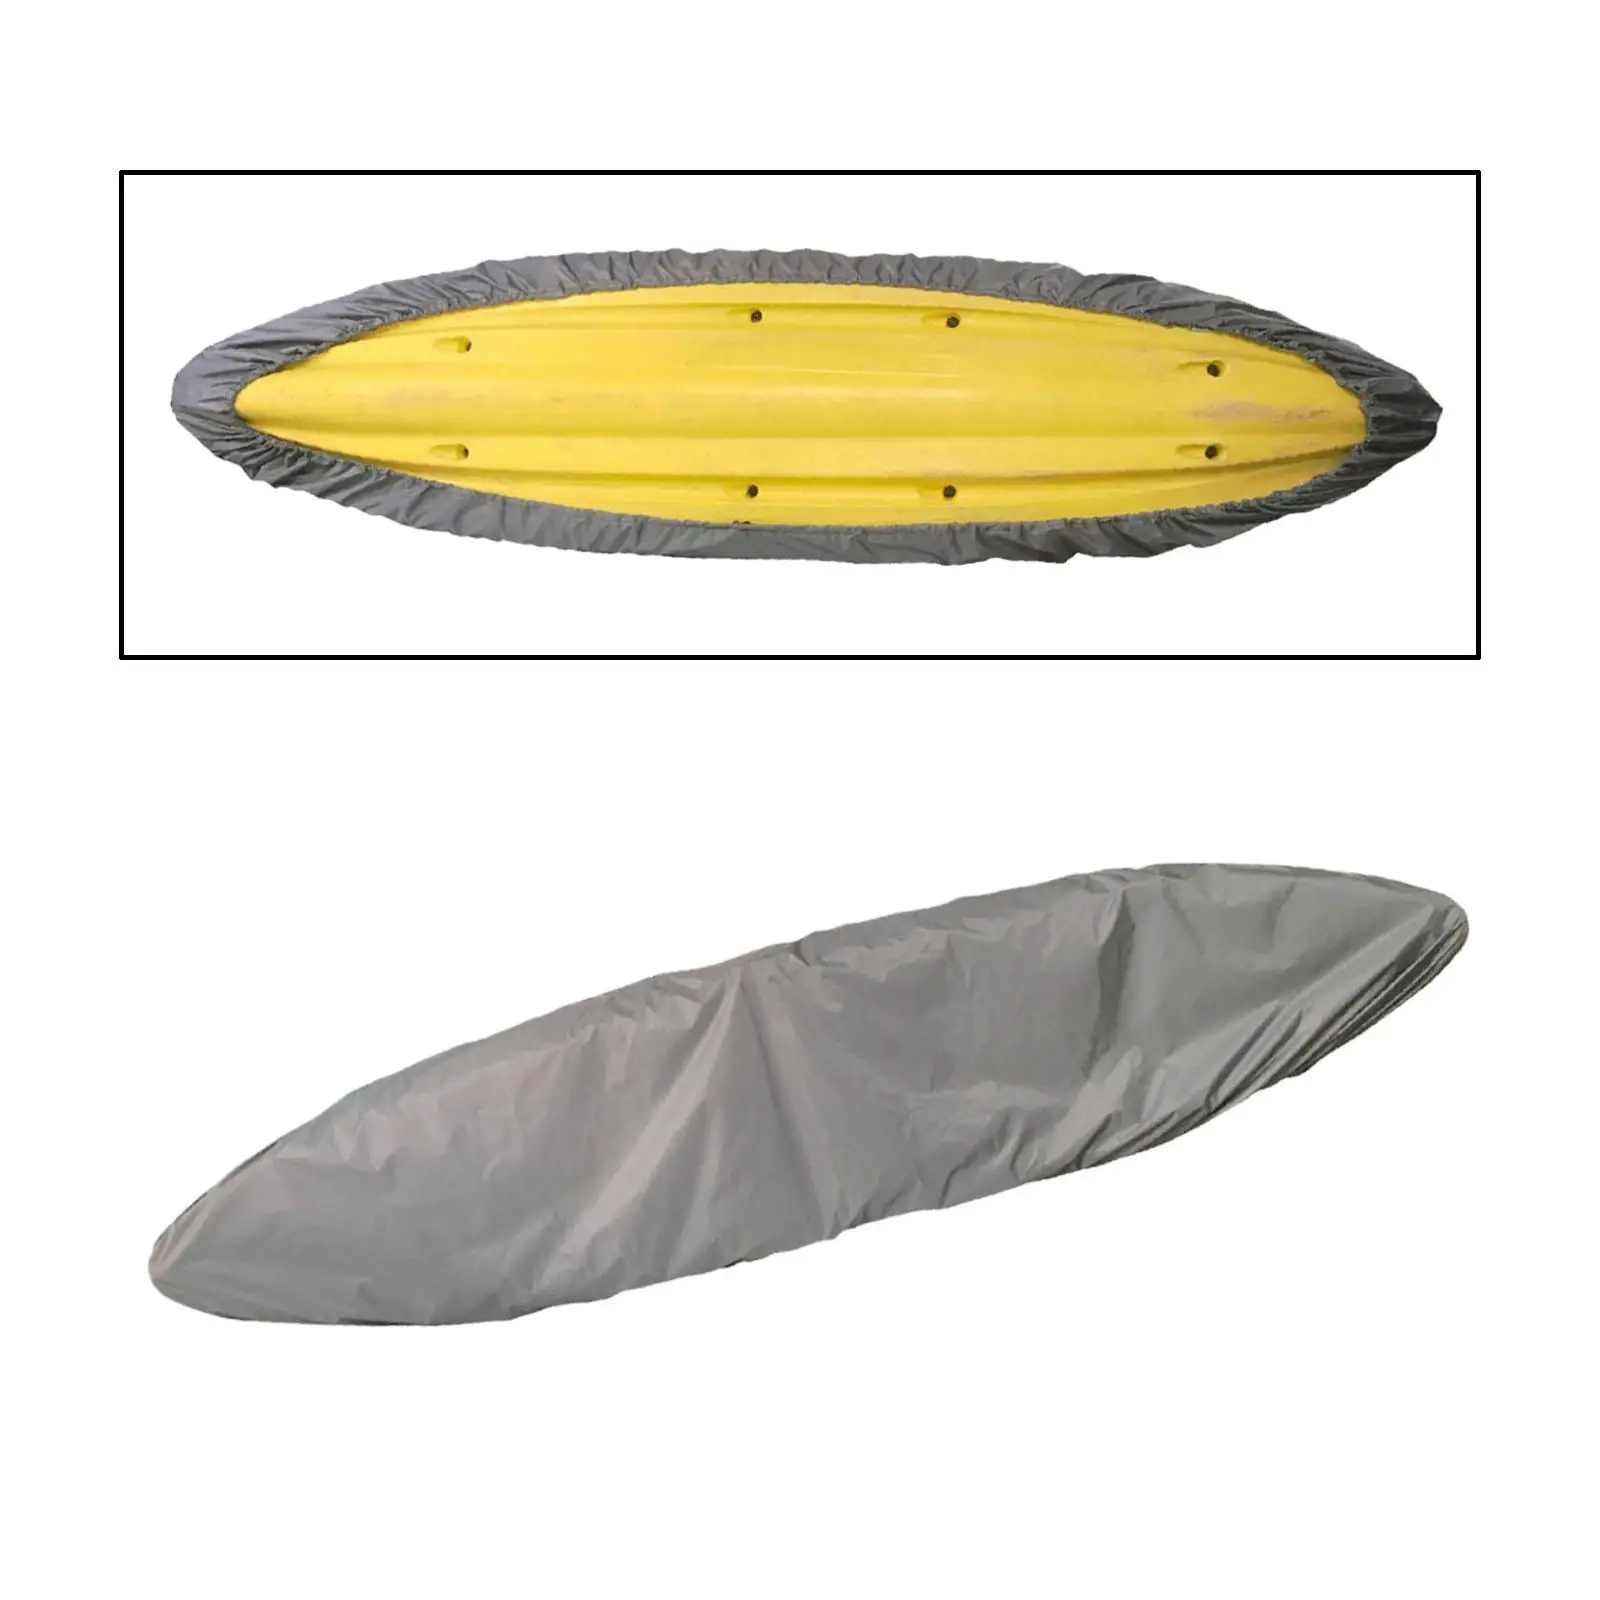 Kayak Cover Waterproof Canoe Cover Protector Oxford Cloth Boat Storage Cover 350cm